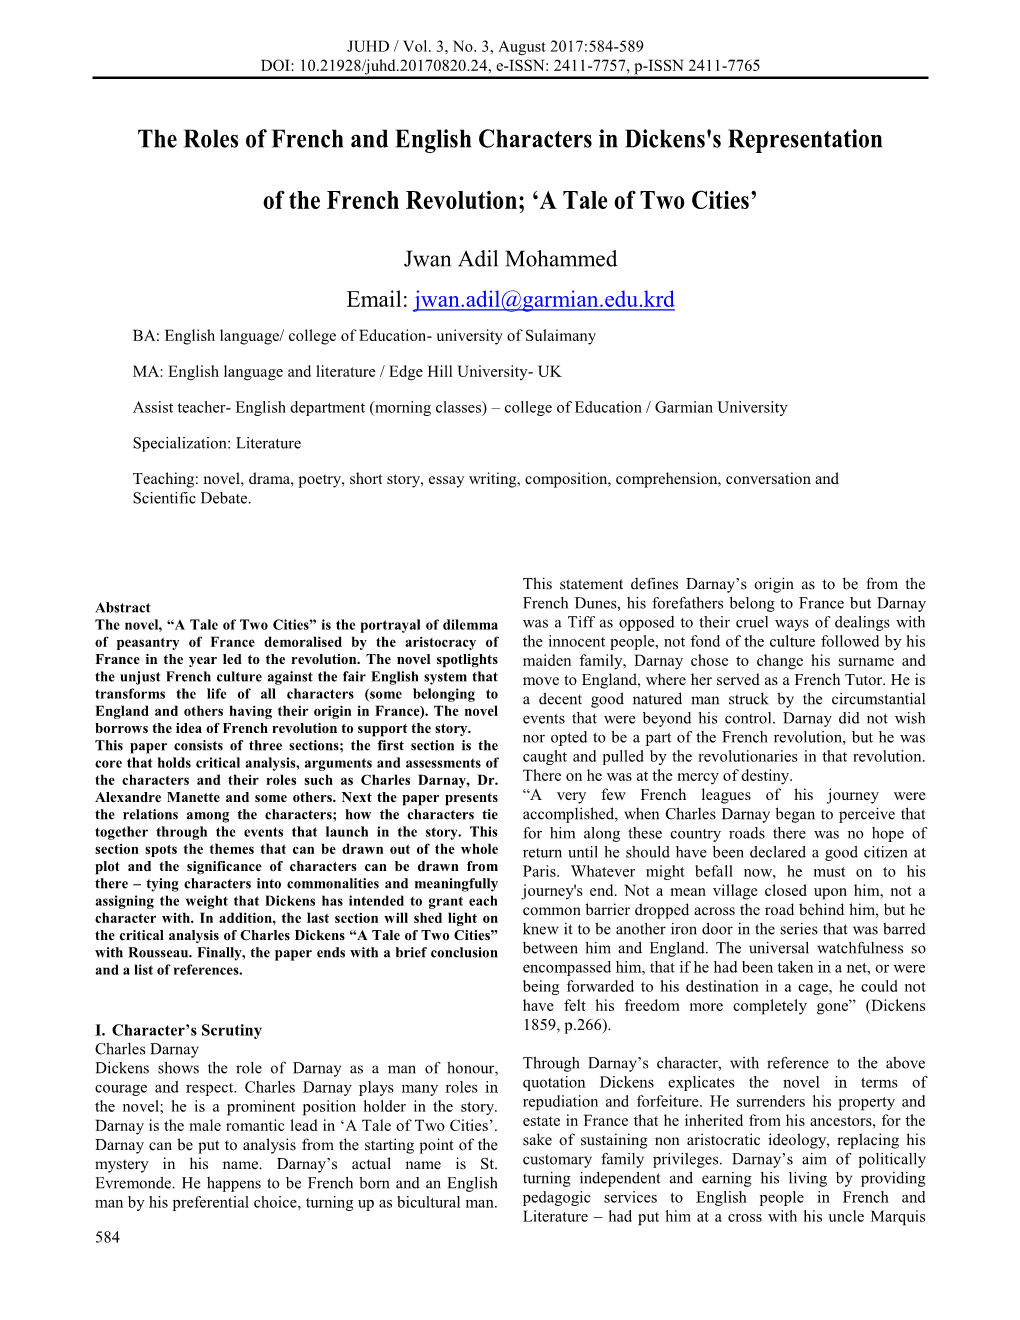 The Roles of French and English Characters in Dickens's Representation of the French Revolution